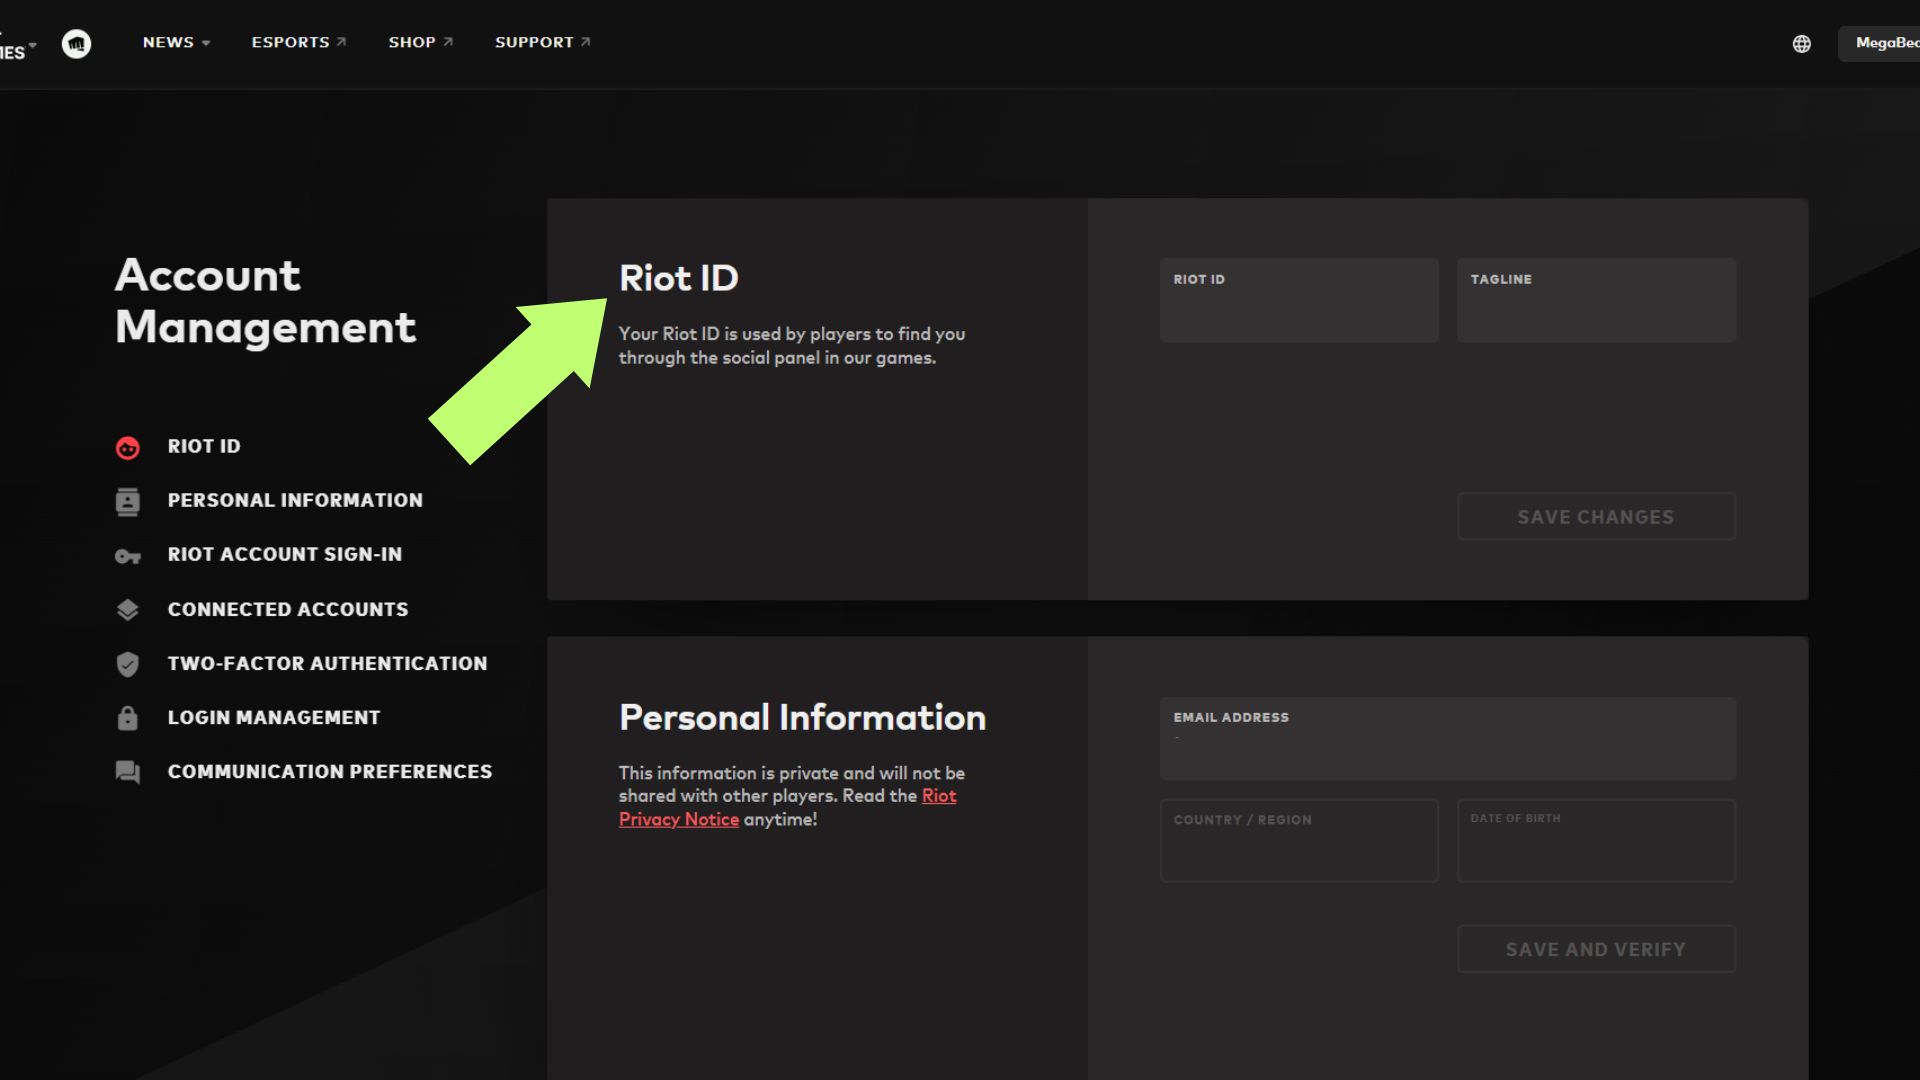 Change your Riot ID through Riot Games Account Management.